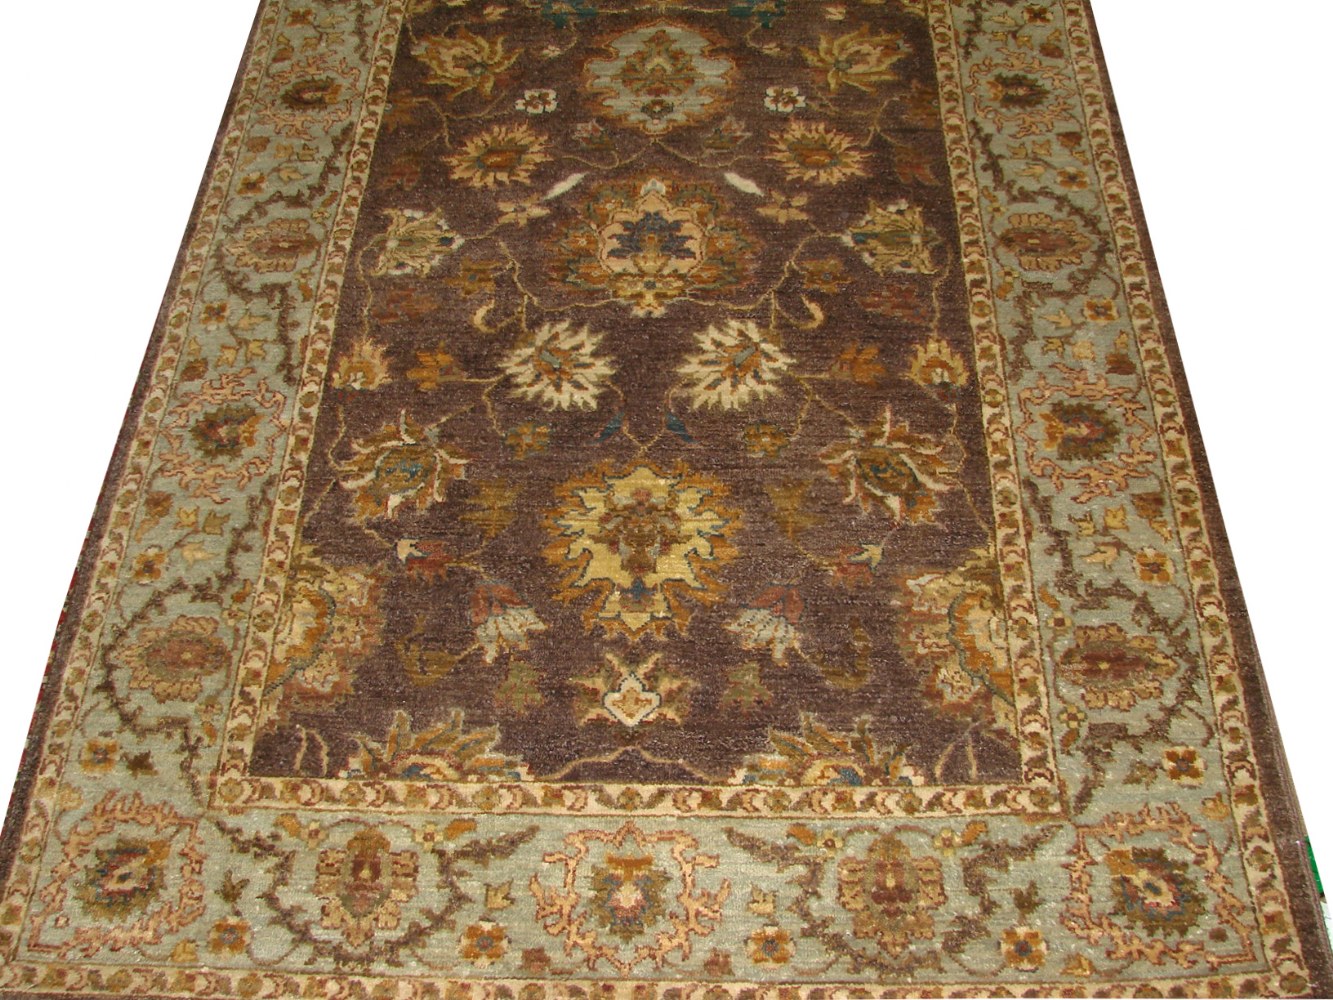 4x6 Traditional Hand Knotted Wool Area Rug - MR14639